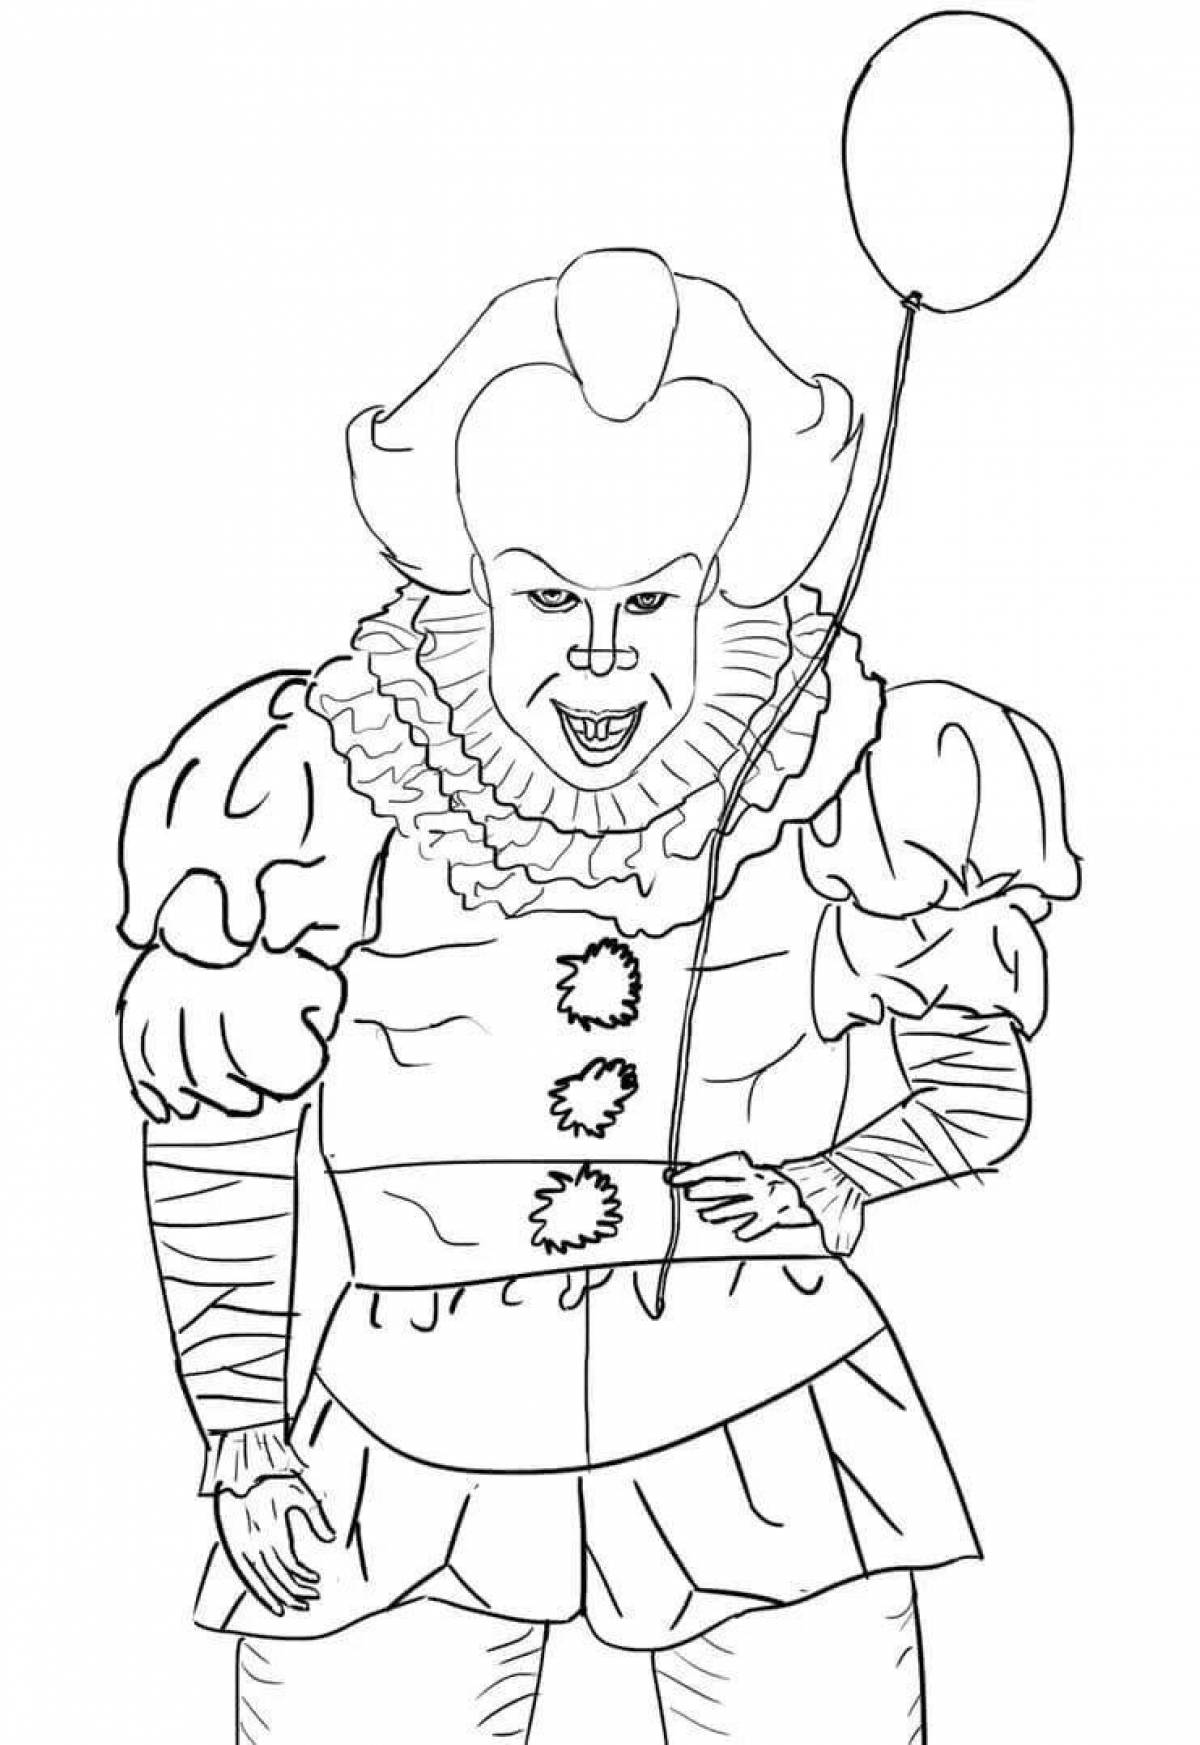 Pennywise's disgusting coloring book